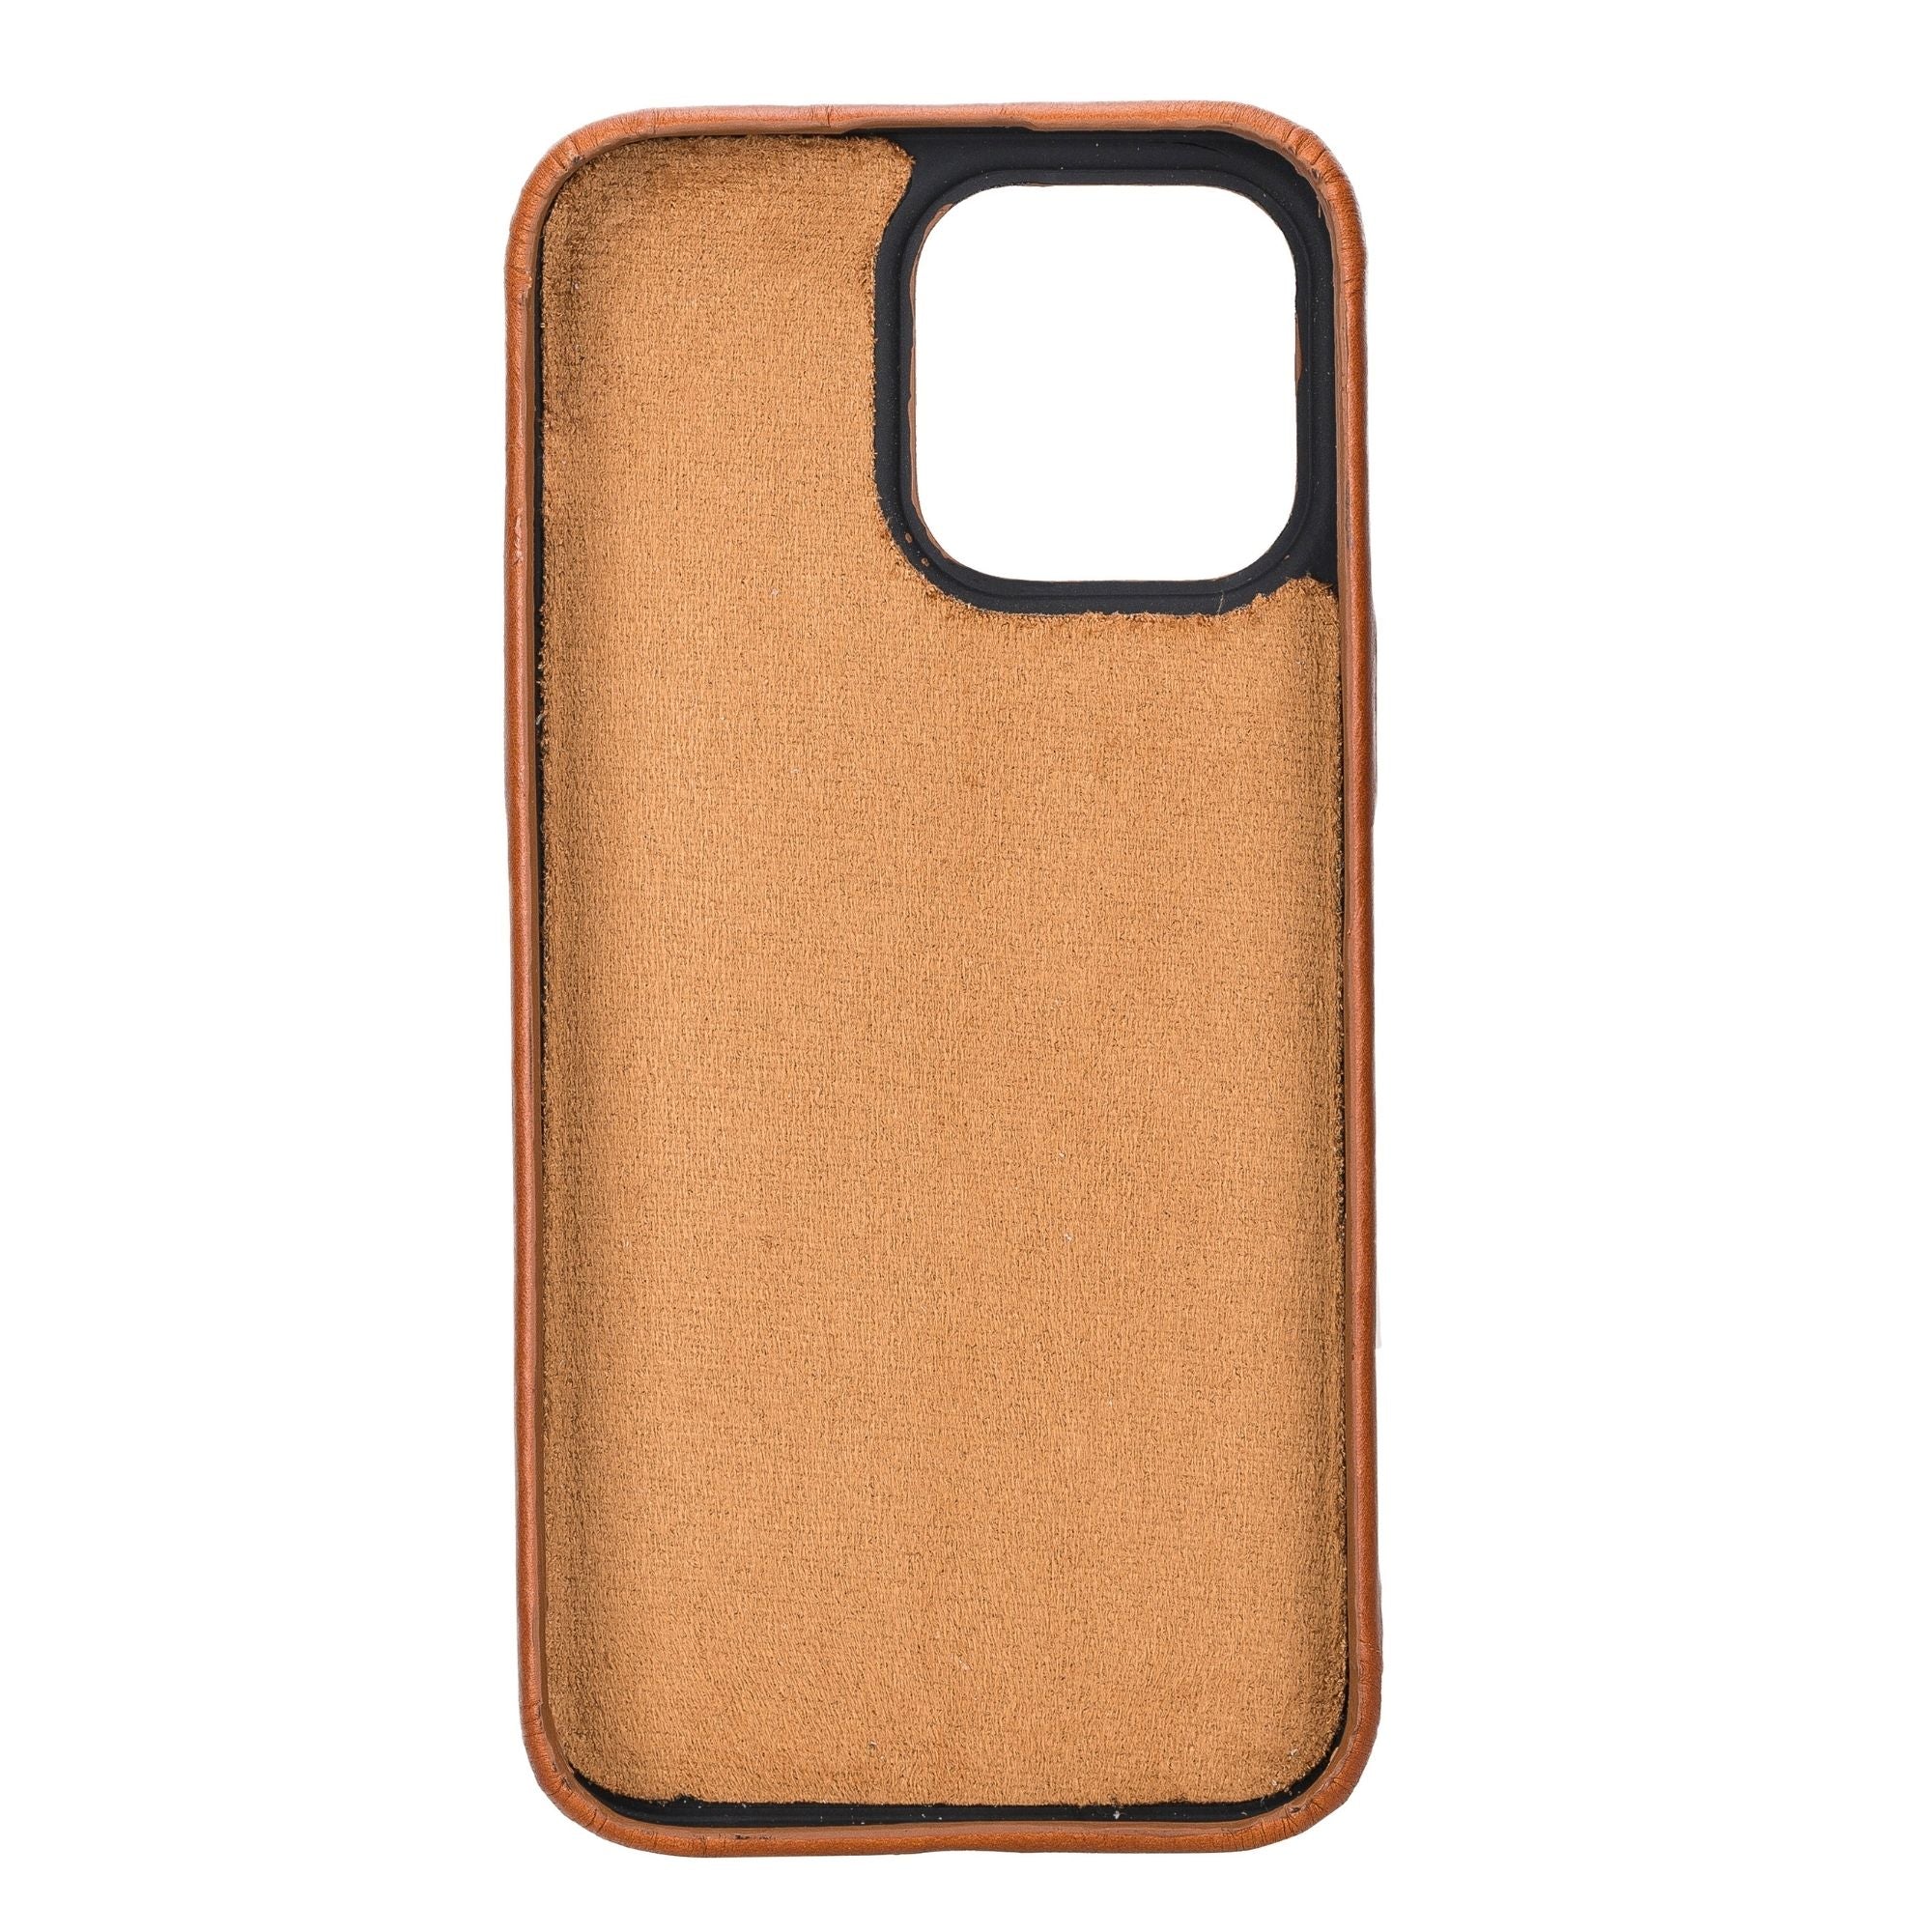 Pinedale Leather Snap-on Case for iPhone 12 Series - iPhone 12 Pro Max - Tan - TORONATA